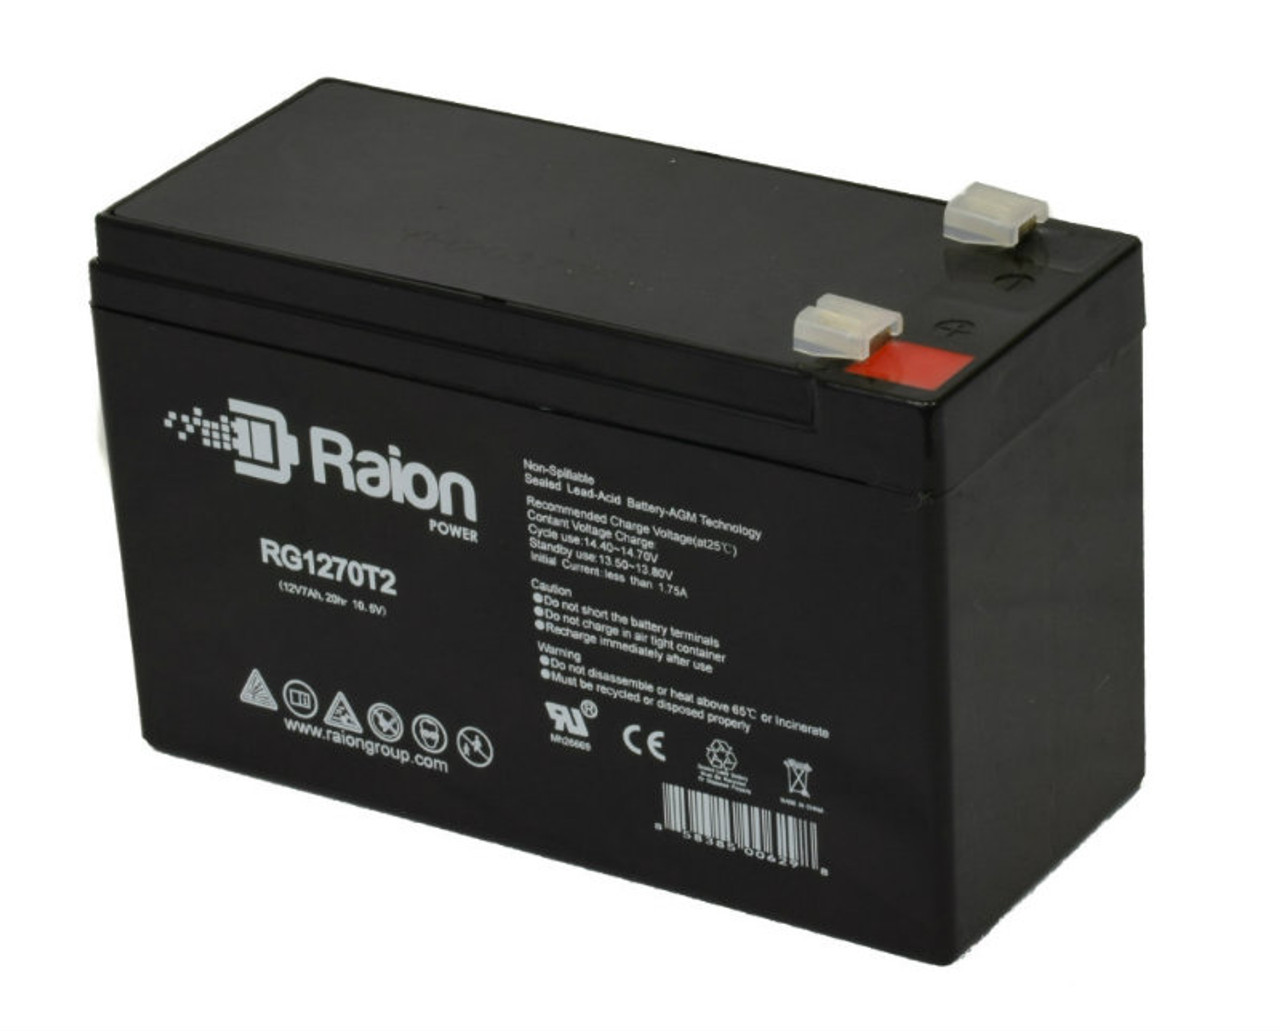 Raion Power RG1270T1 12V 7Ah Non-Spillable Replacement Battery for Sheng Yang SY1270